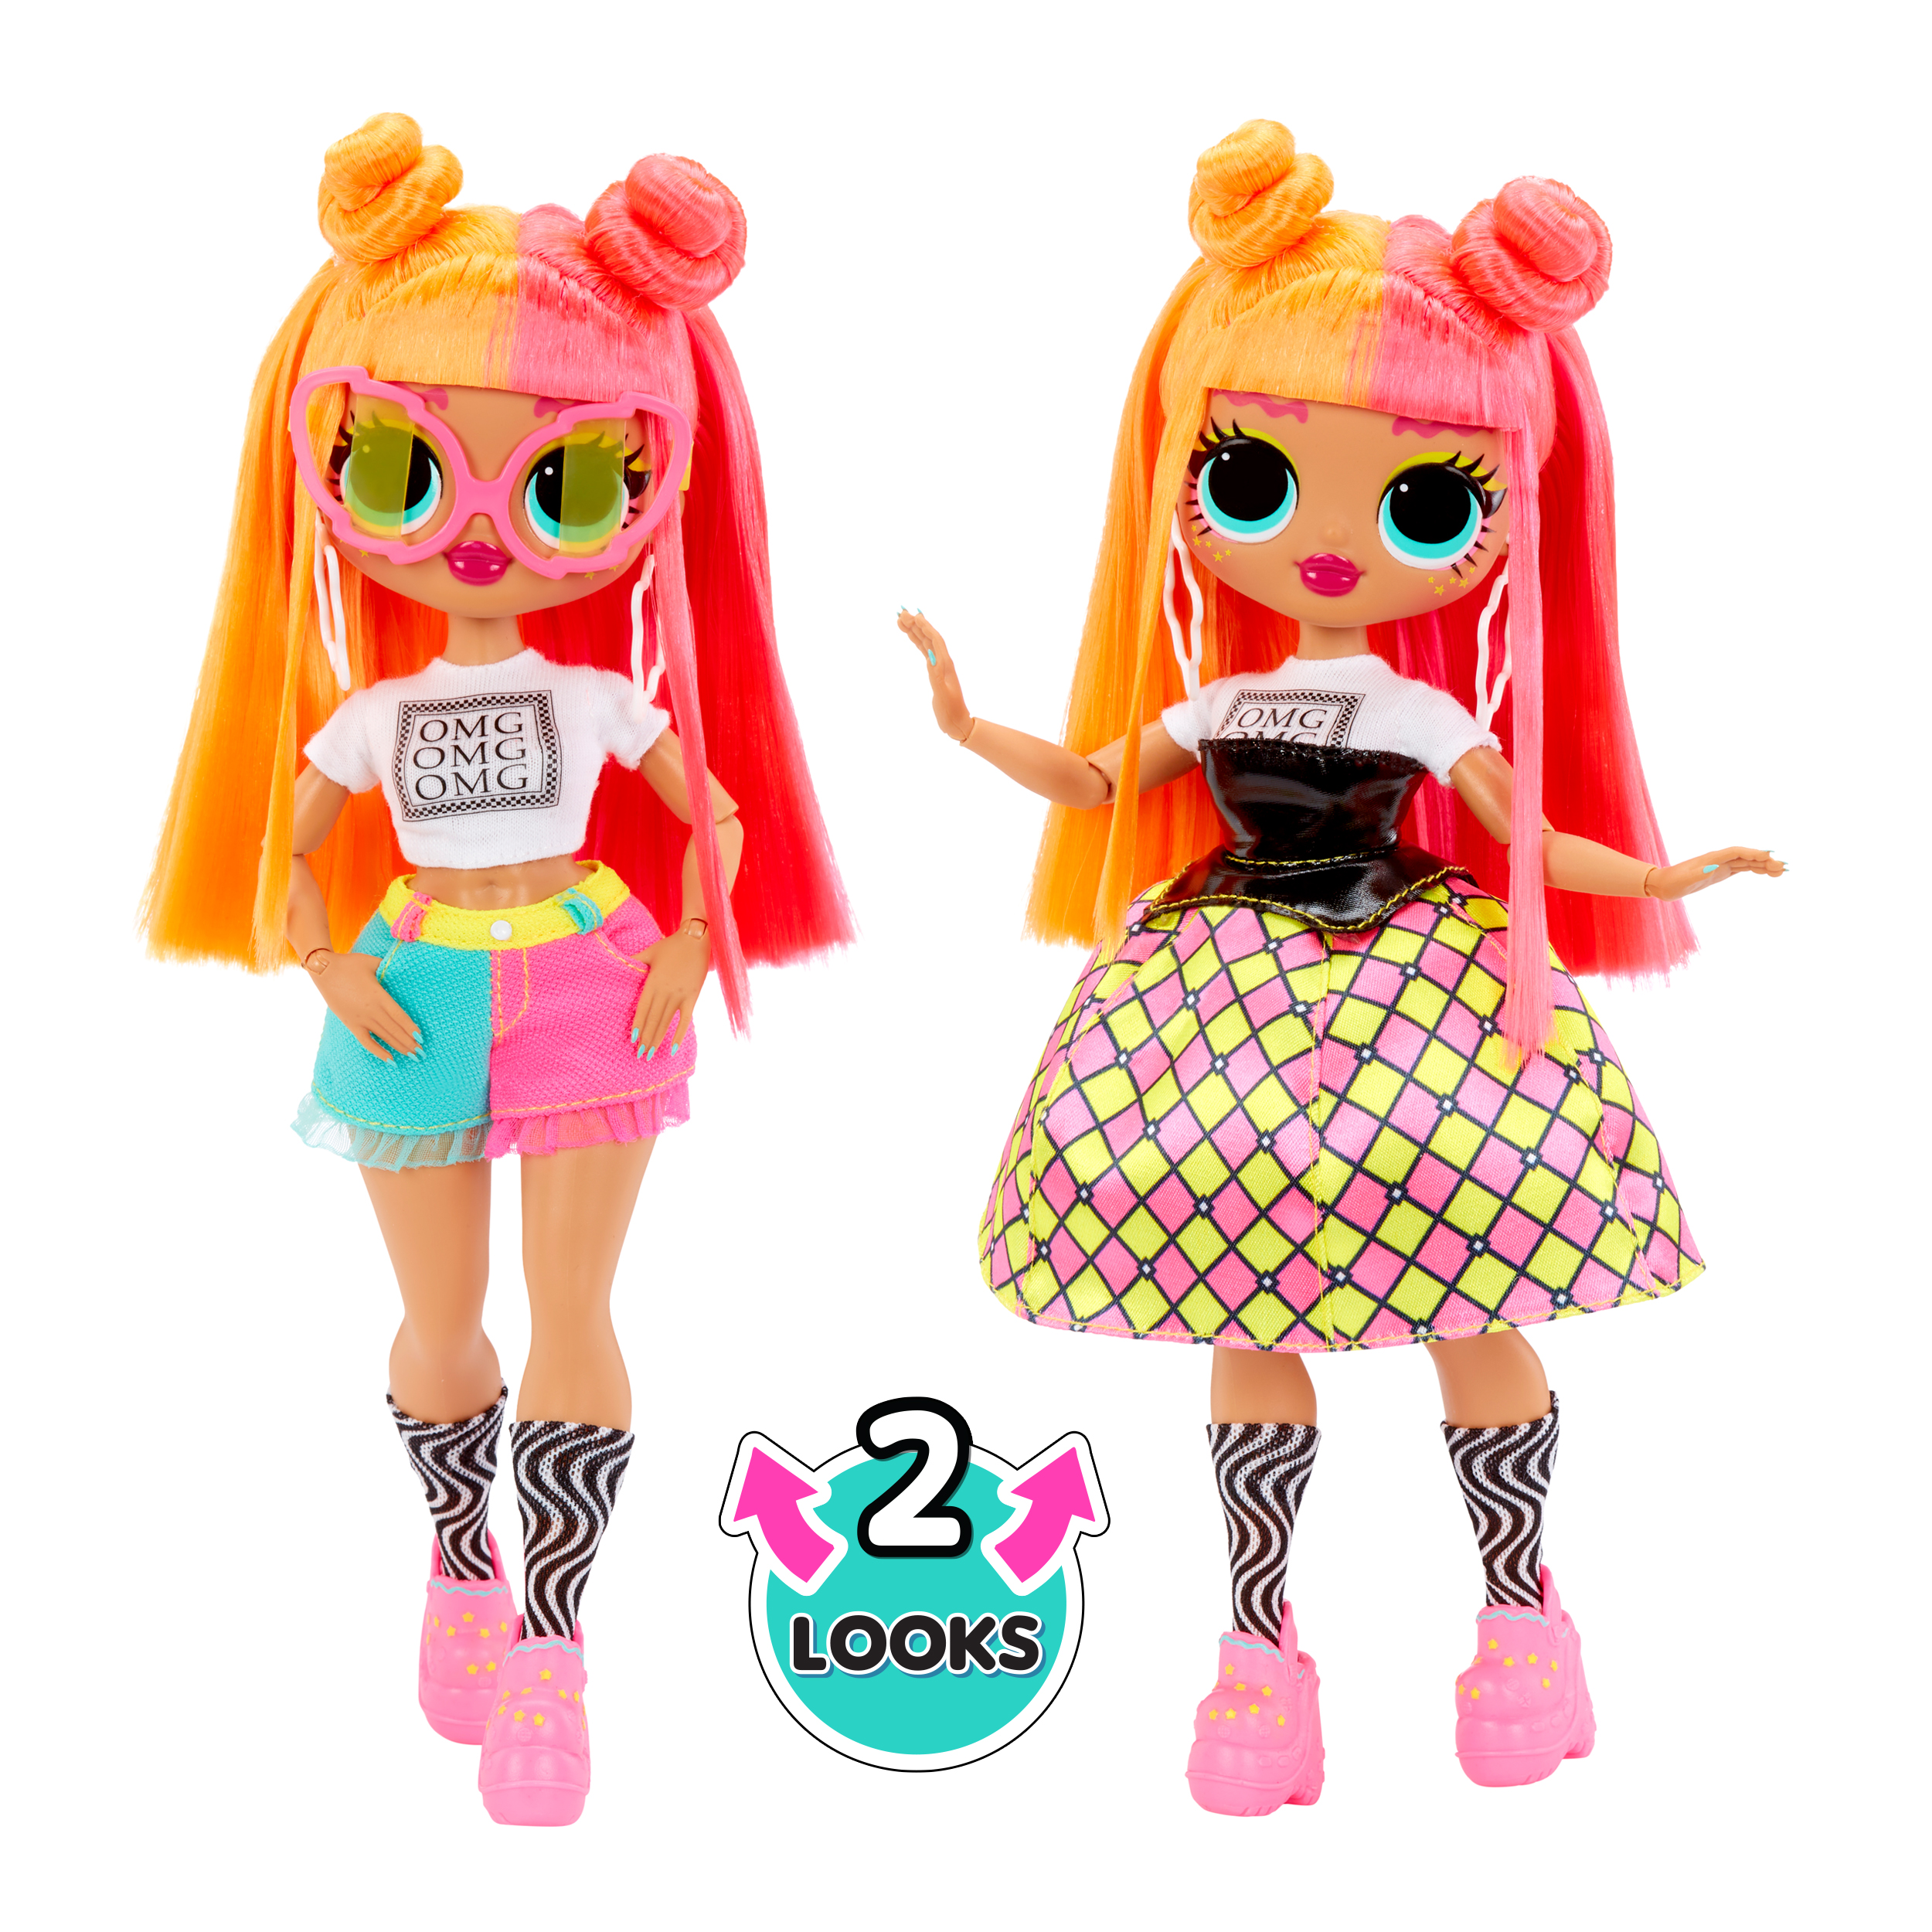 LOL Surprise OMG Neonlicious Fashion Doll with Multiple Surprises Including Transforming Fashions and Fabulous Accessories, Kids Gift Ages 4+ - image 3 of 8